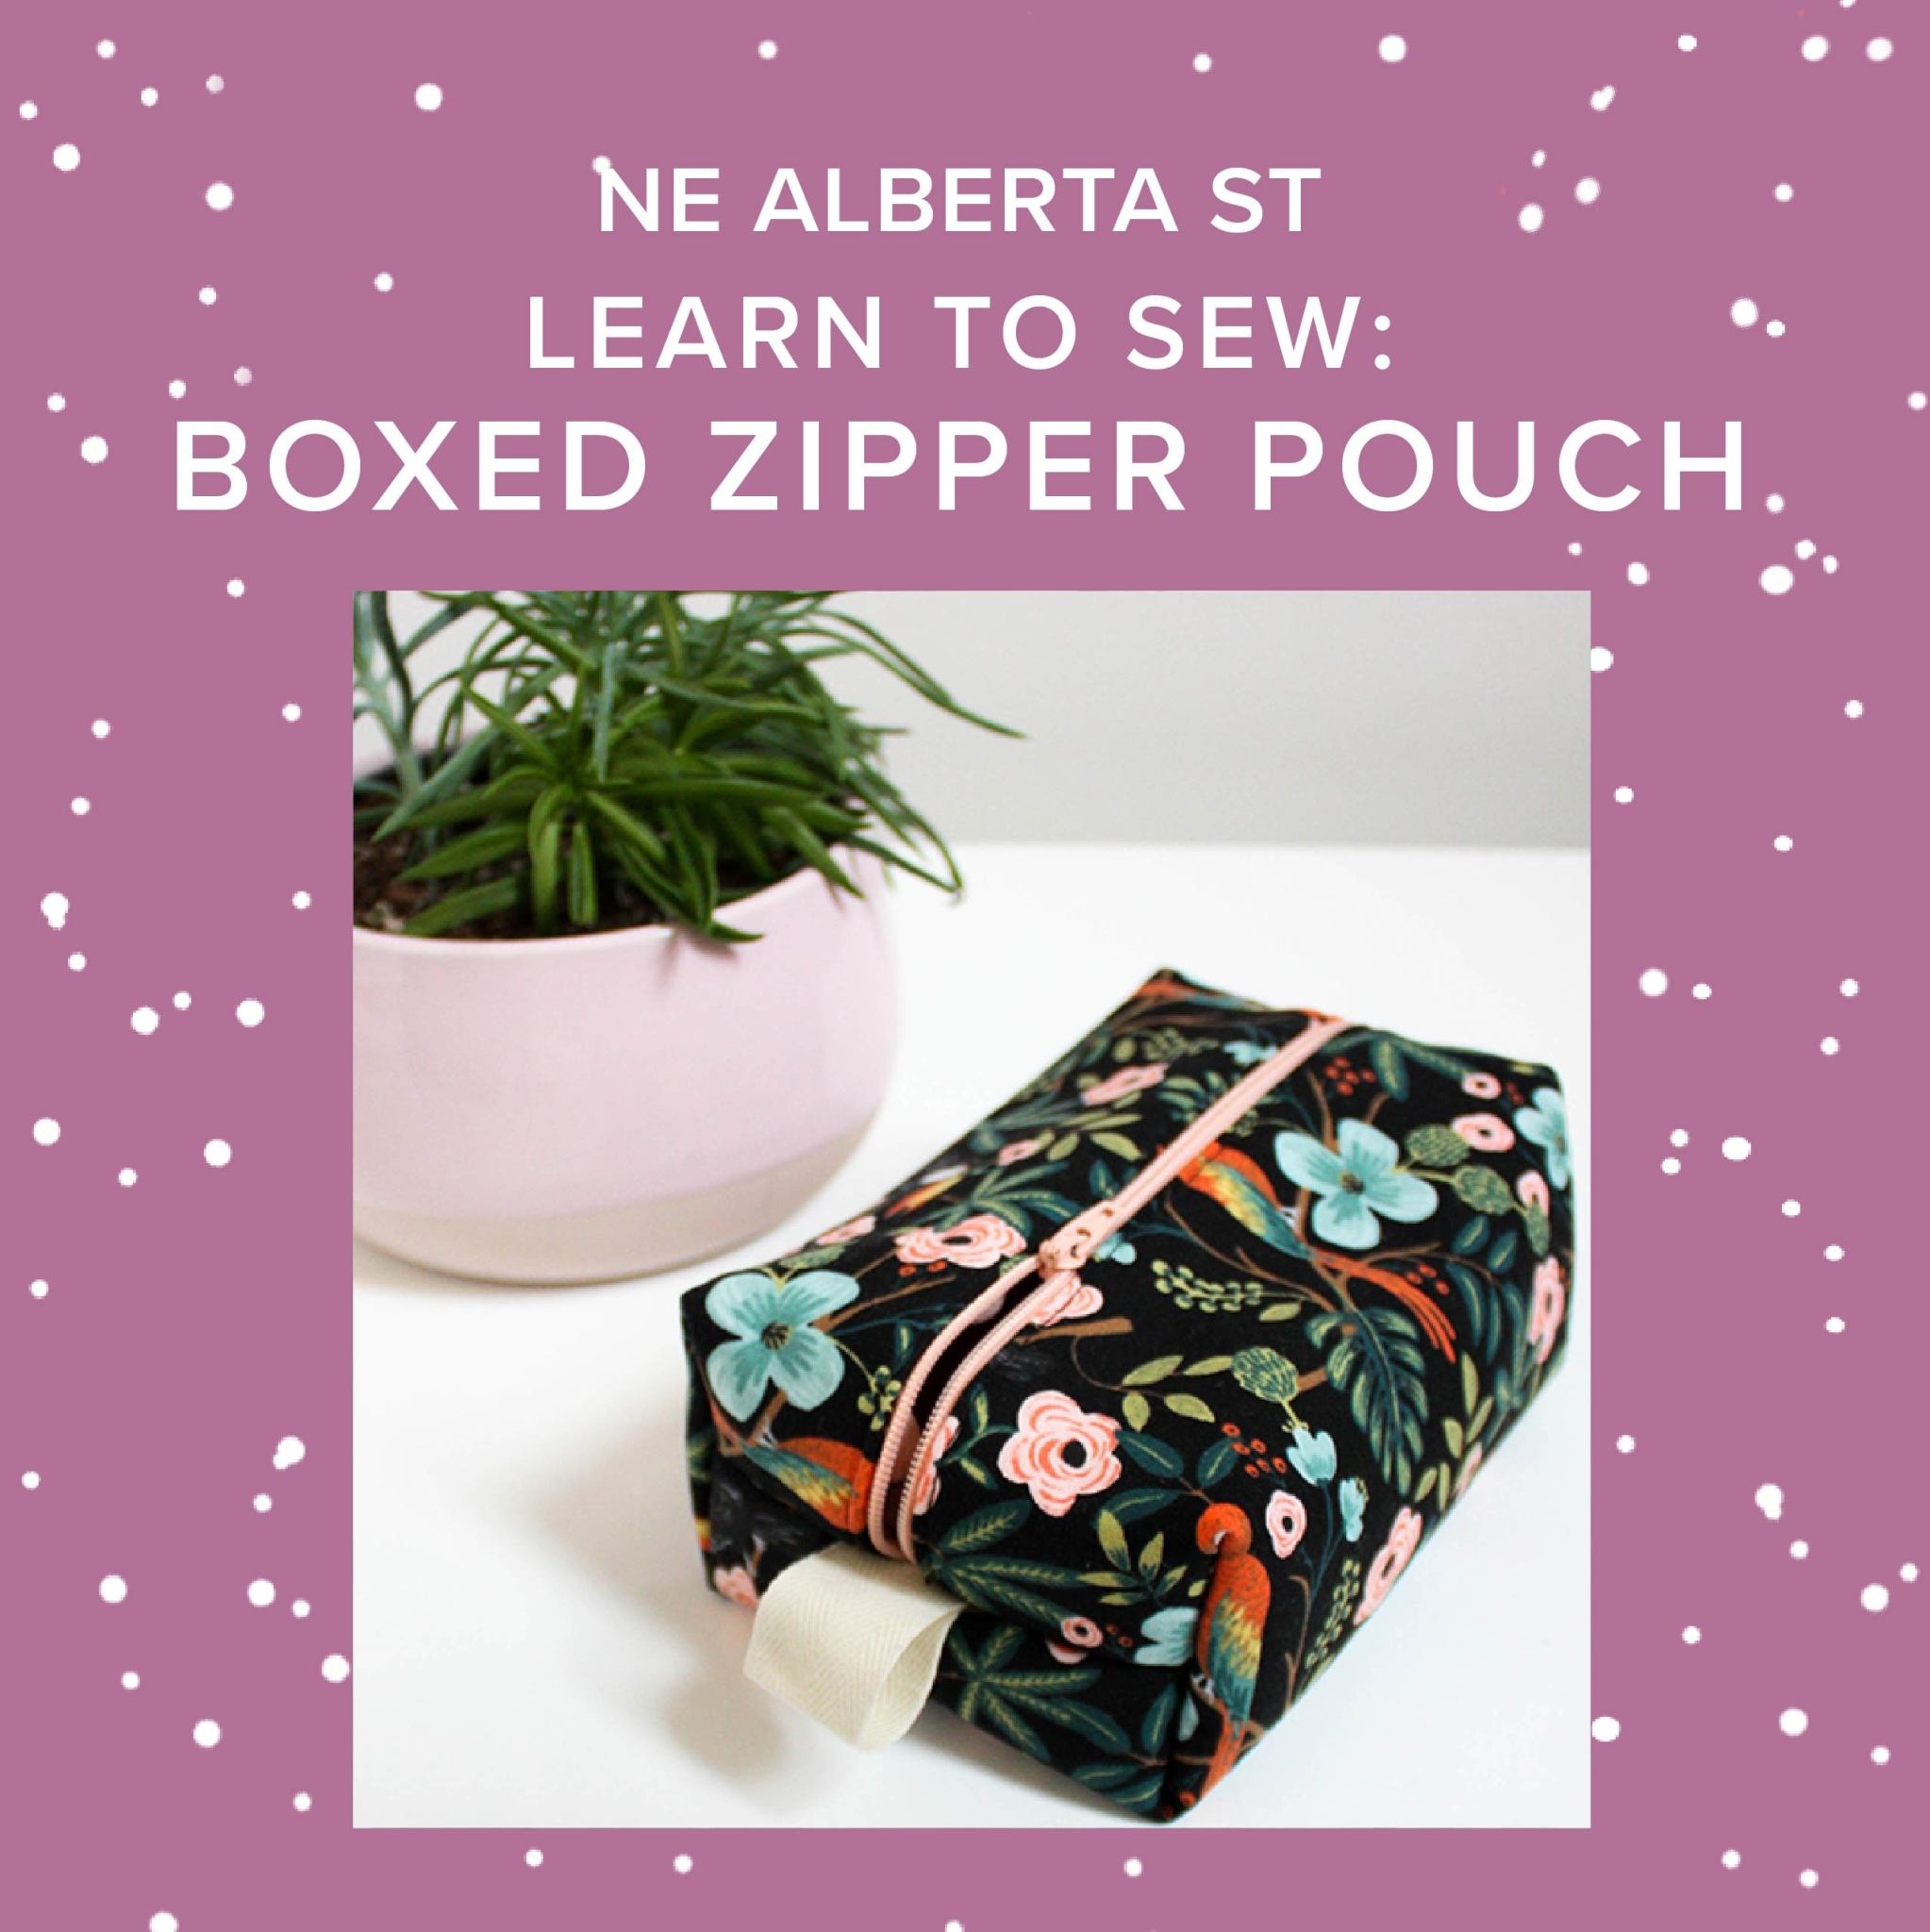 Colleen Connolly CLASS FULL! Learn to Sew: Boxed Zipper Pouch, Tuesday, April 30th, 5:30pm-9pm